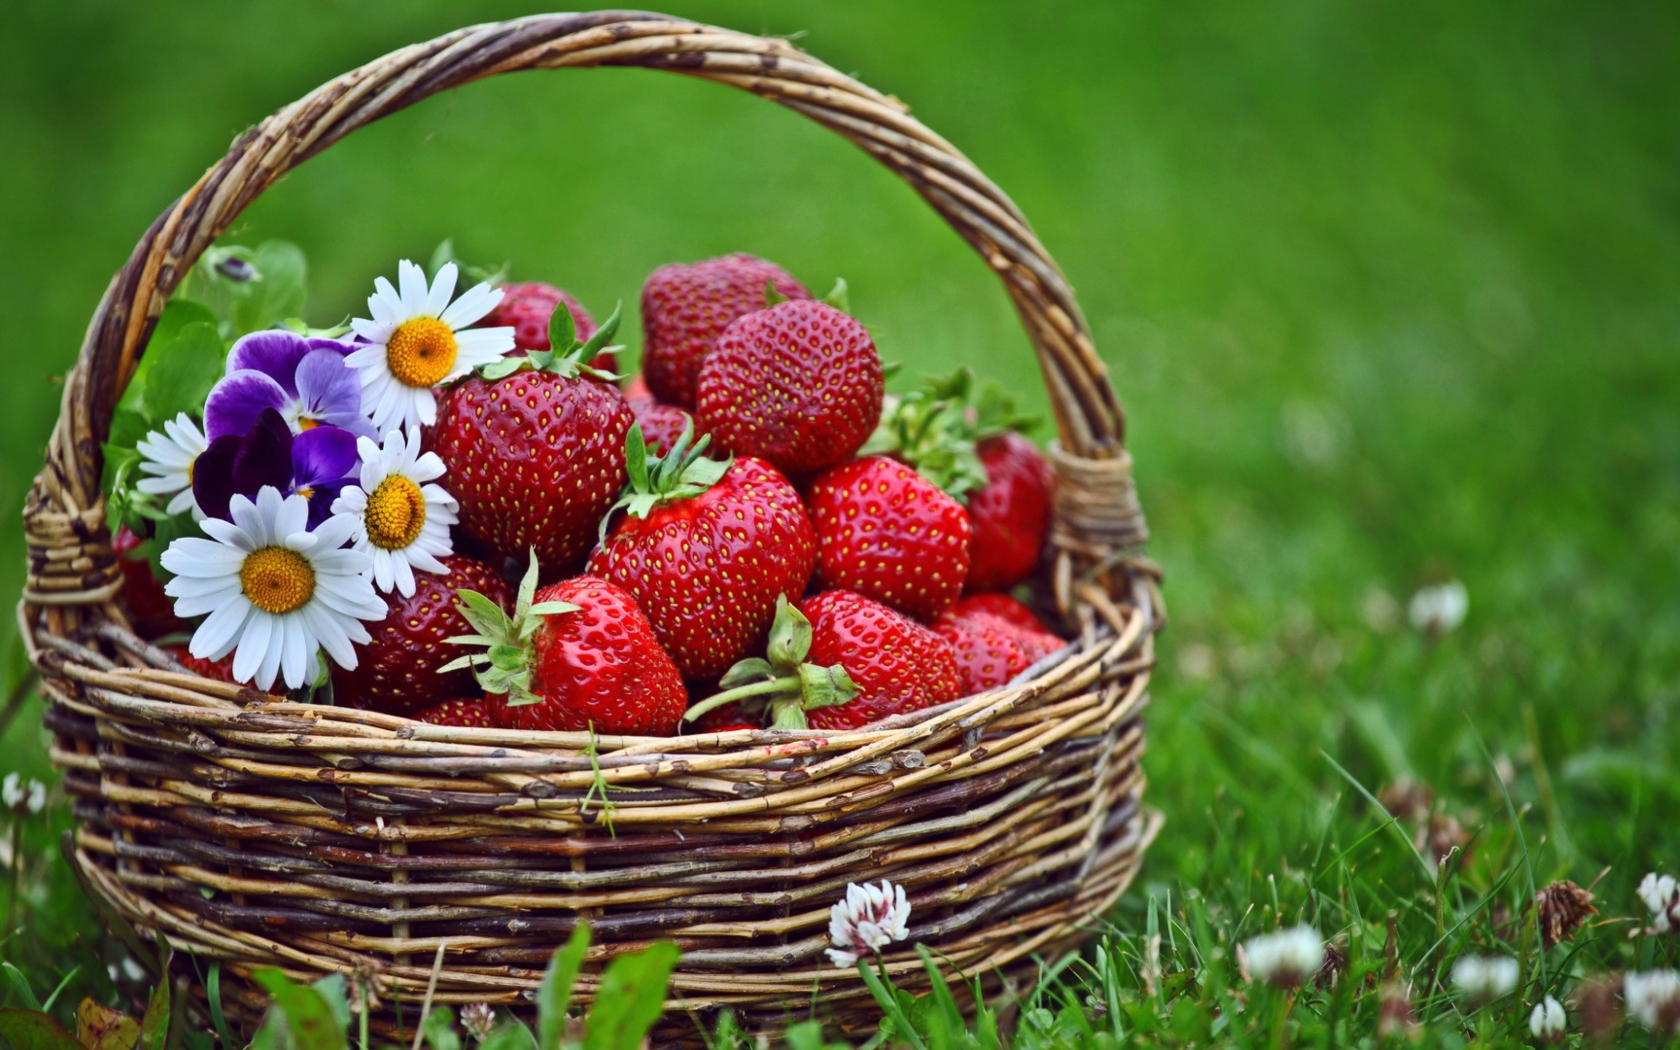 Berries And Flowers wallpaper 1680x1050